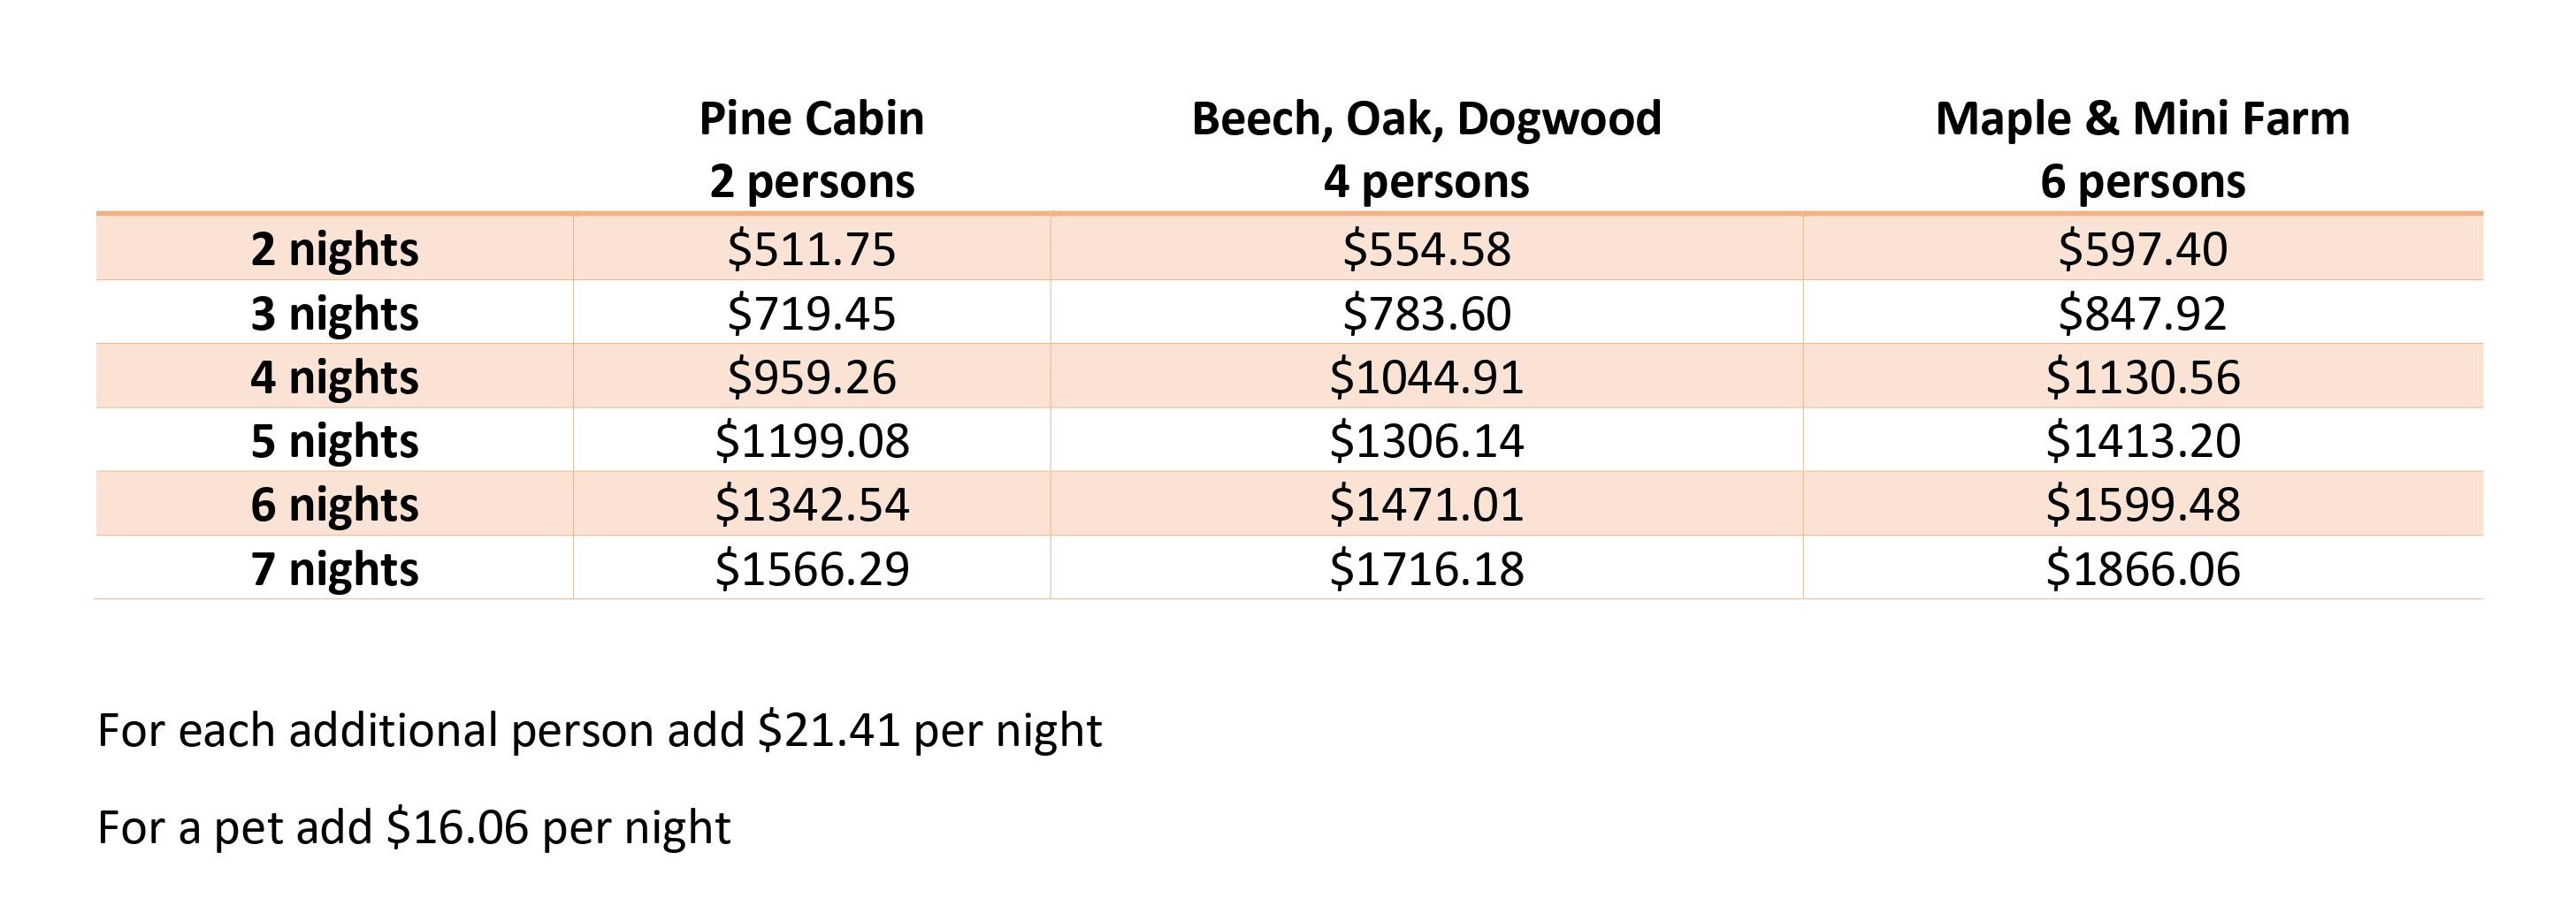 Pricing per cabin for 2-5 nights